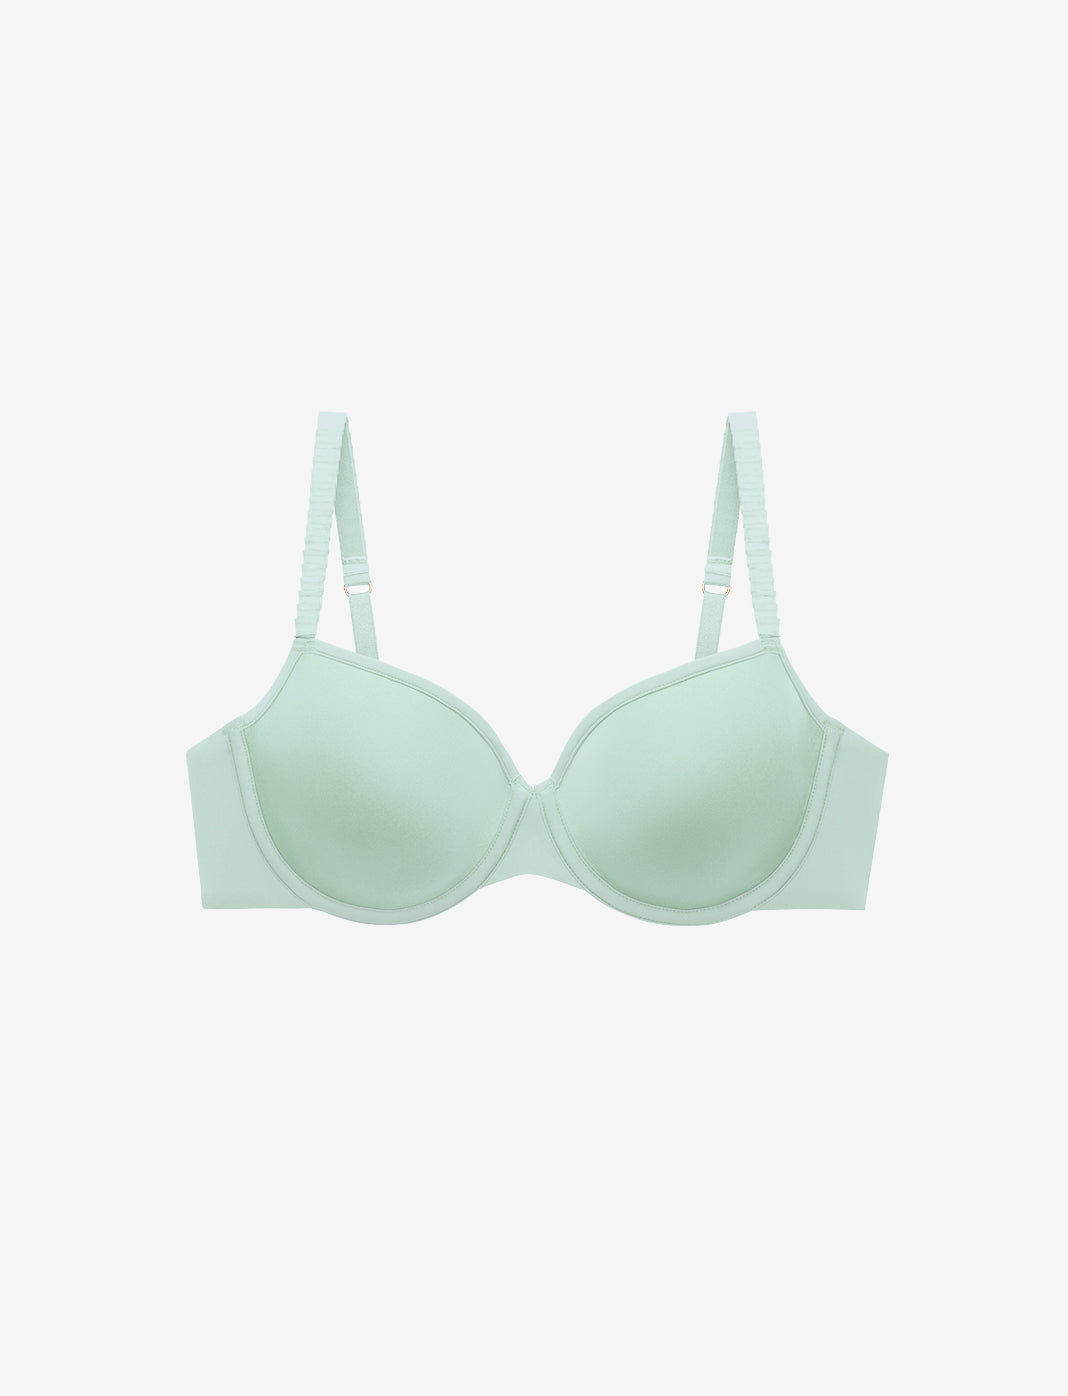 Thirdlove NWT 24/7 Lace Detail T-shirt Bra in Nude 48B Size undefined - $44  New With Tags - From Julie